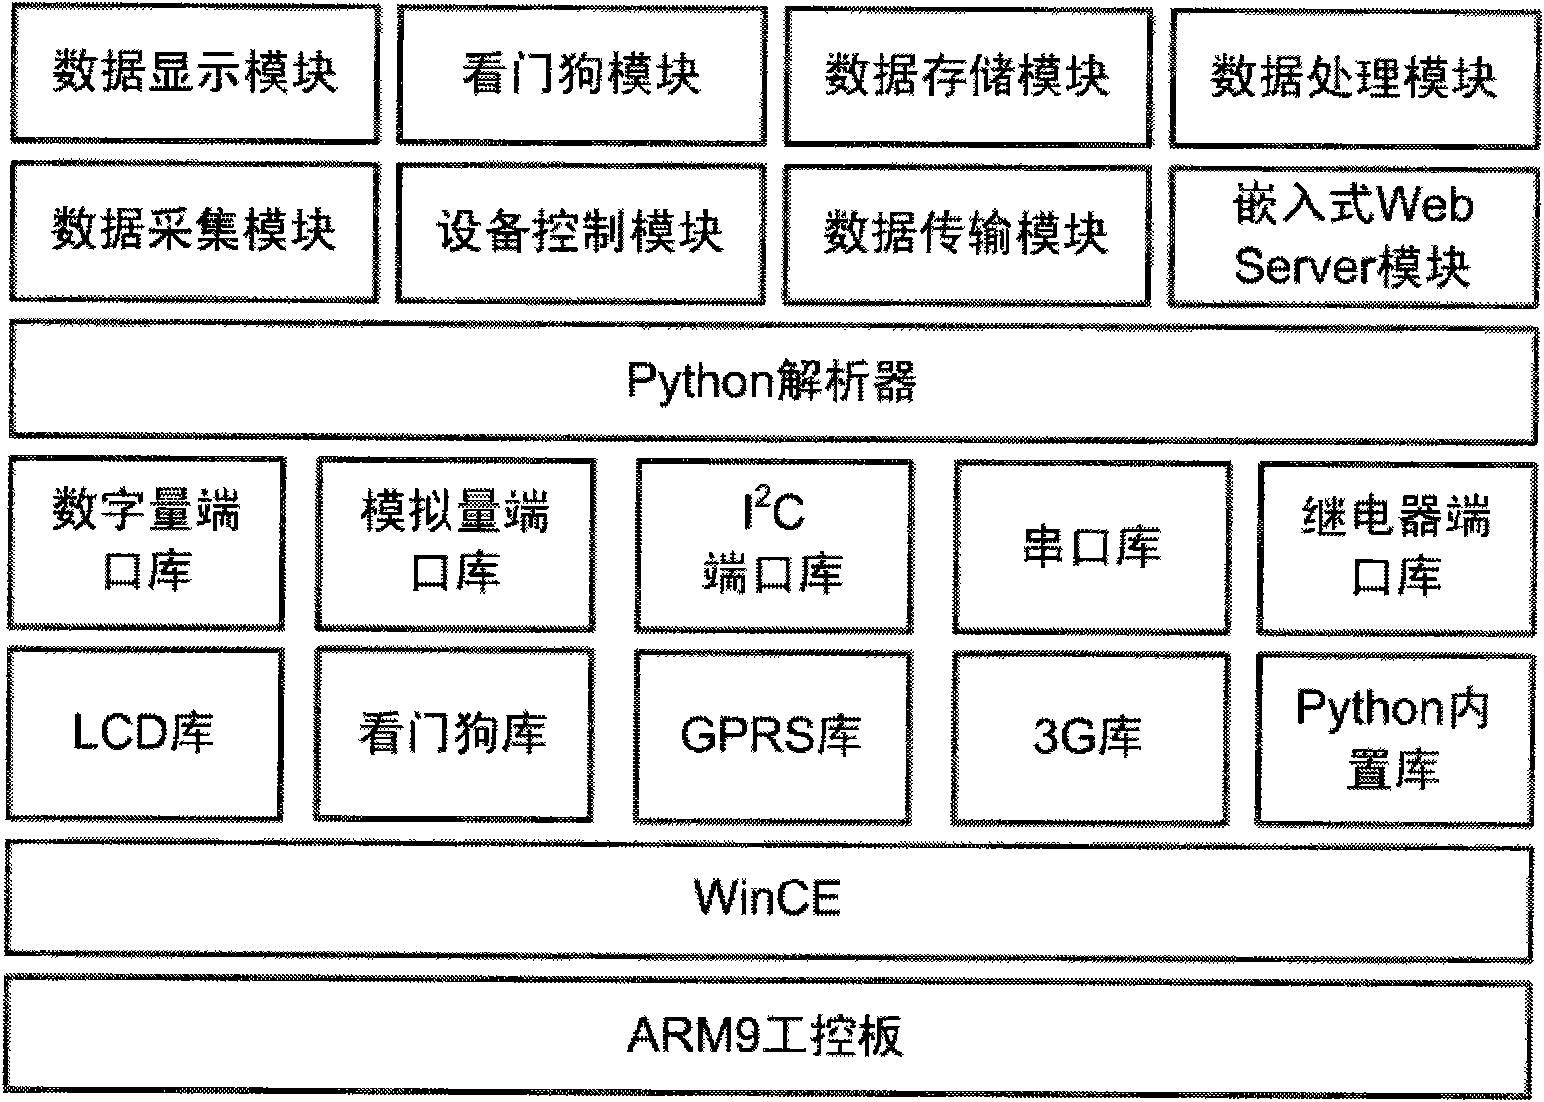 Embedded data acquisition and equipment control system